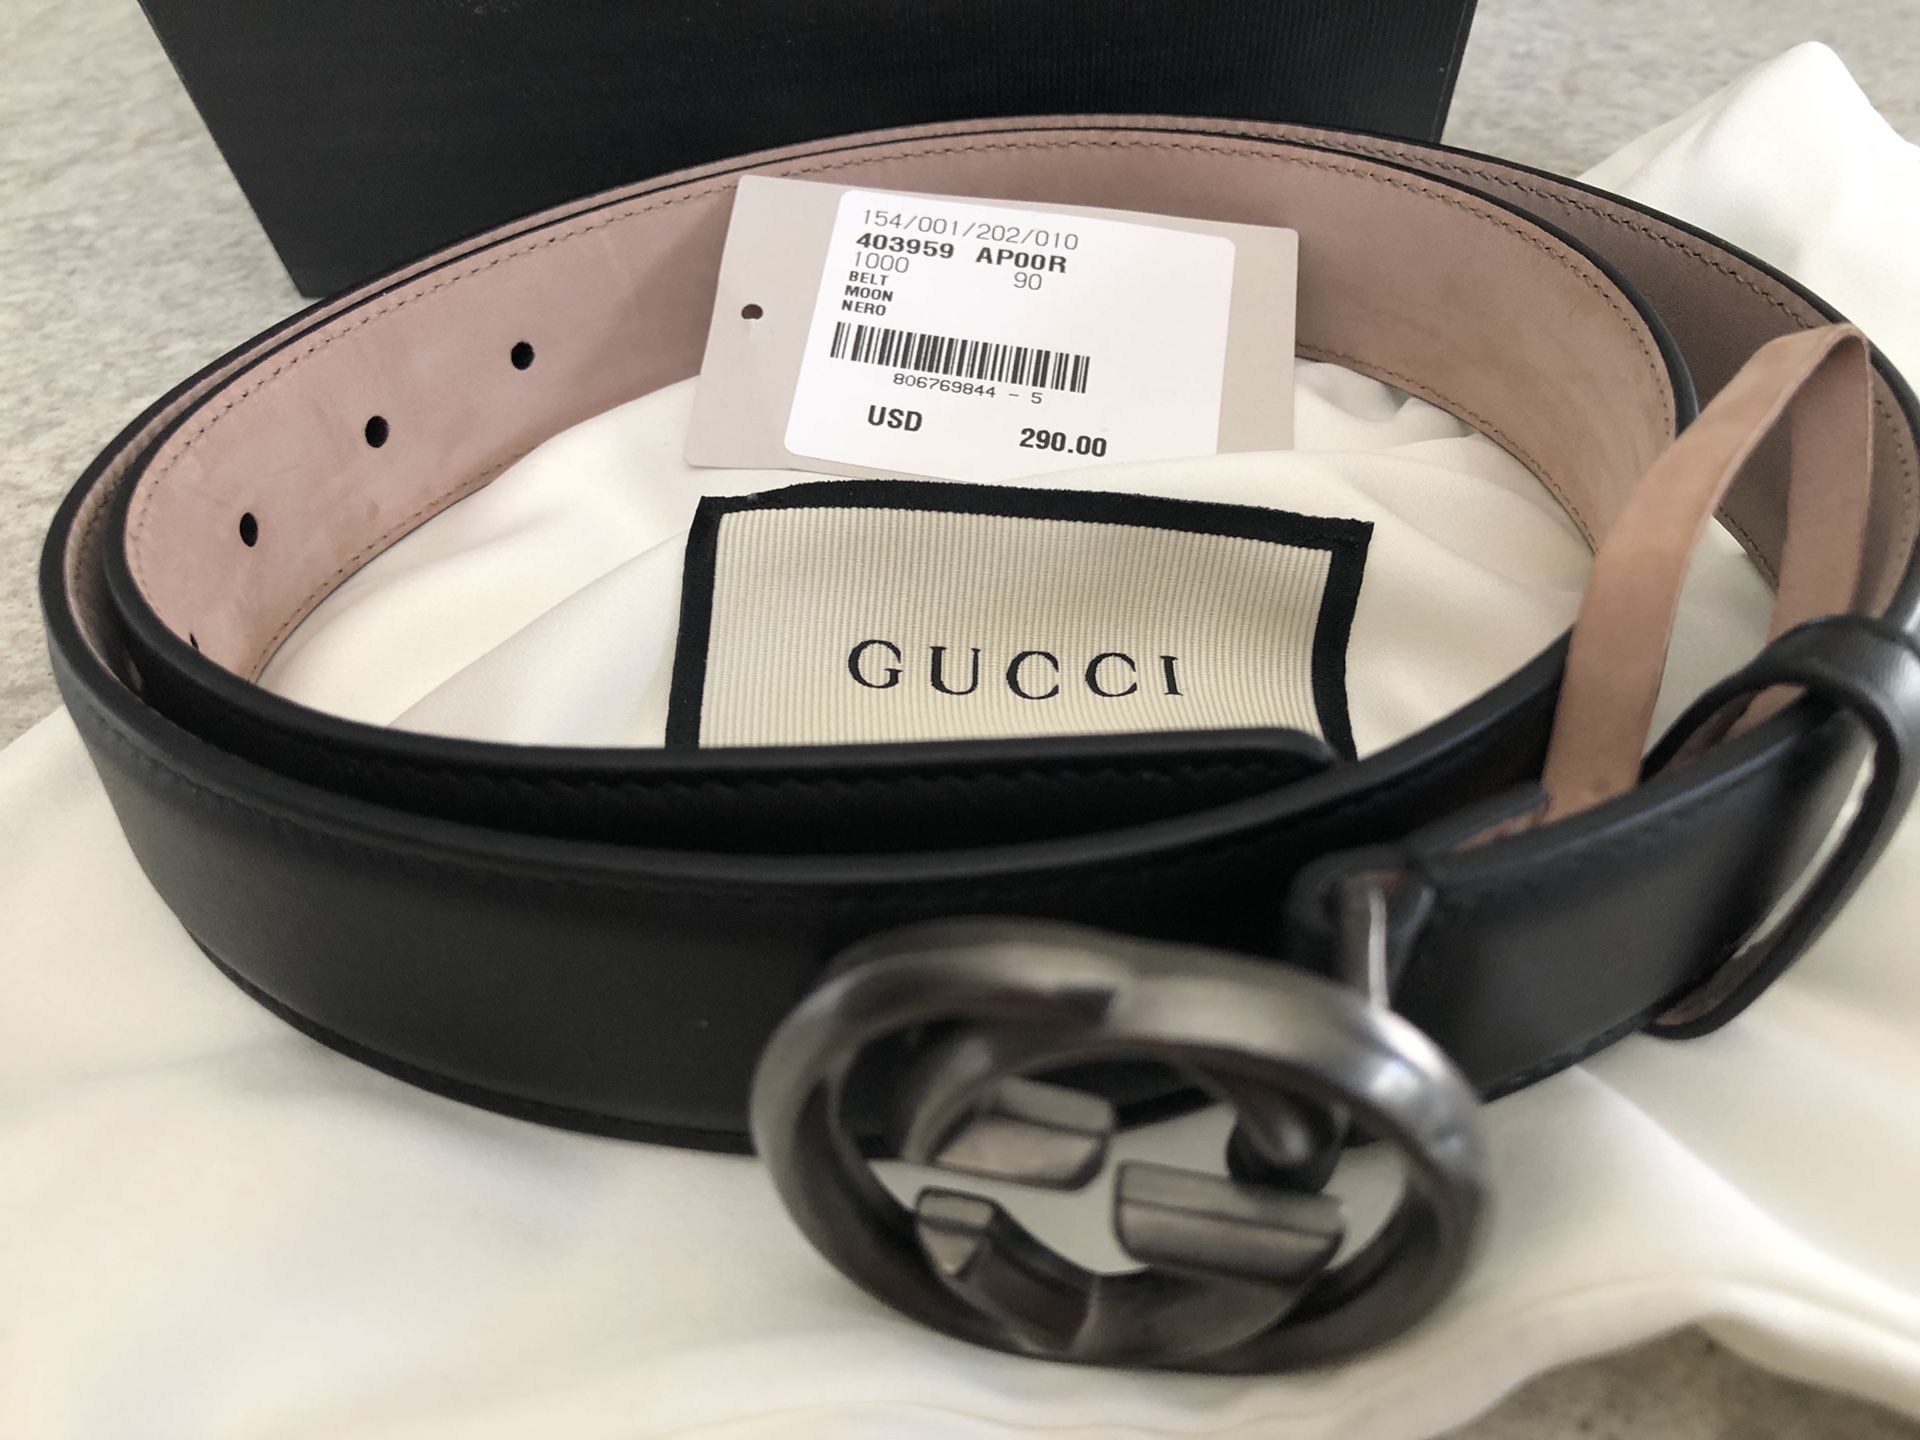 New Gucci Belt and Willing to trade